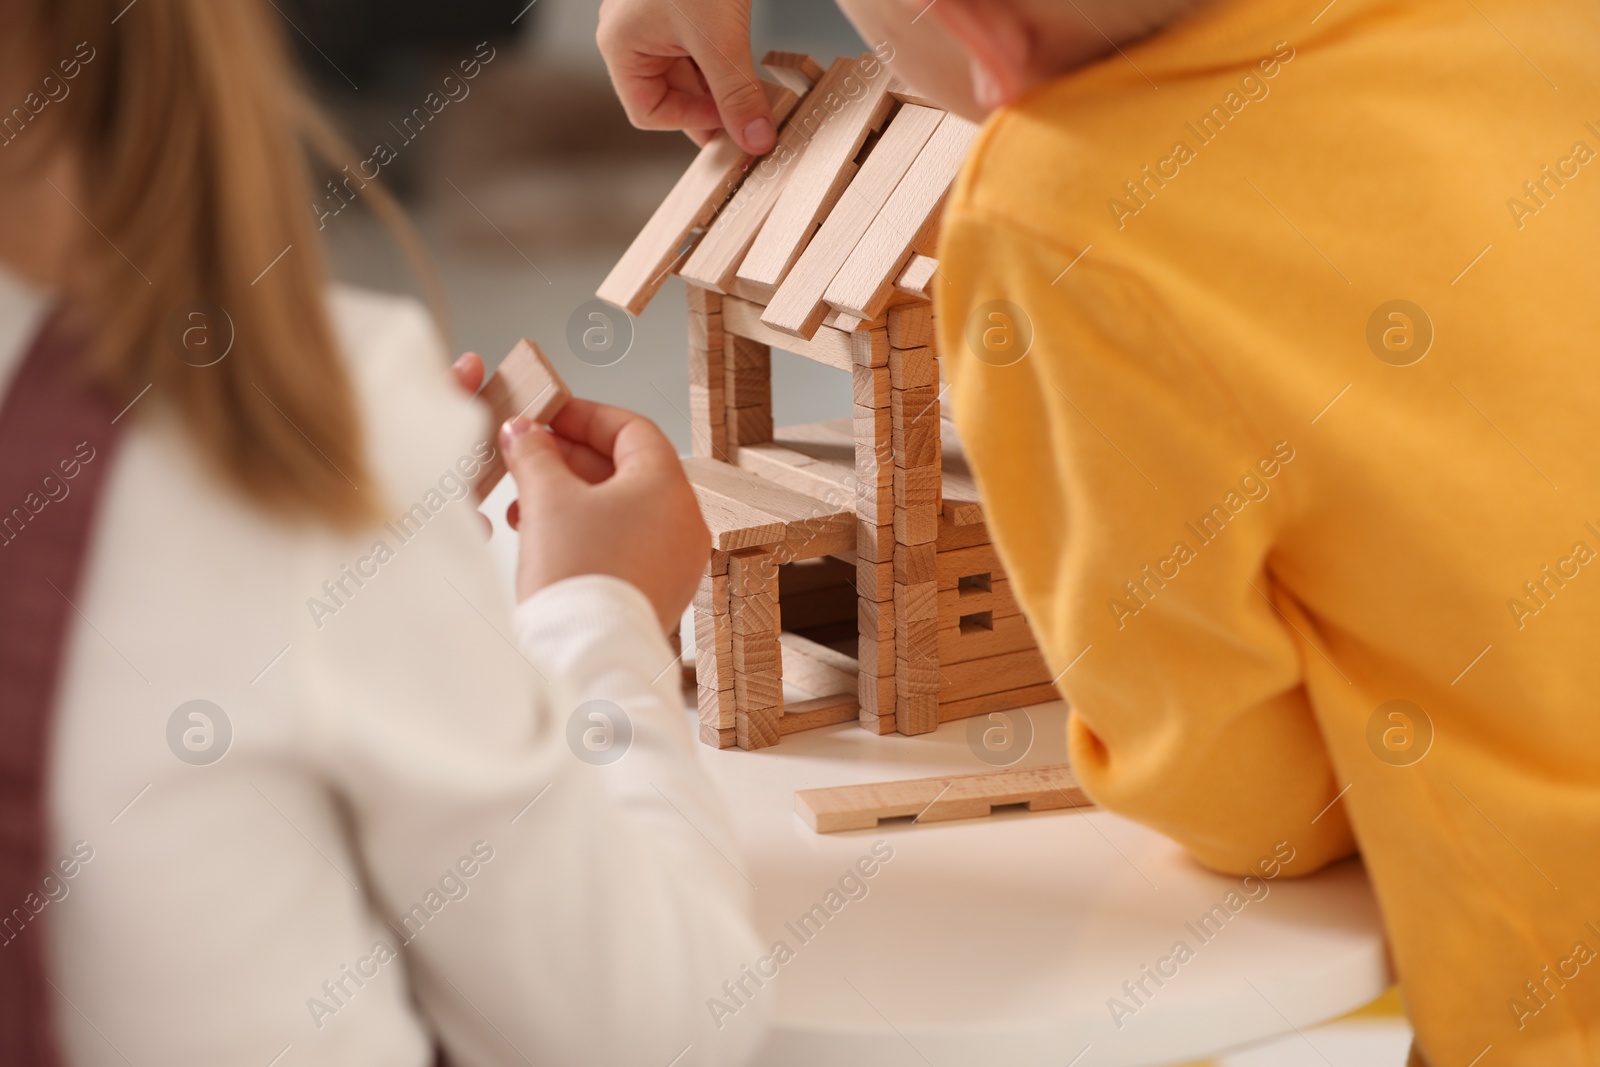 Photo of Little boy and girl playing with wooden house at white table indoors, closeup. Children's toys